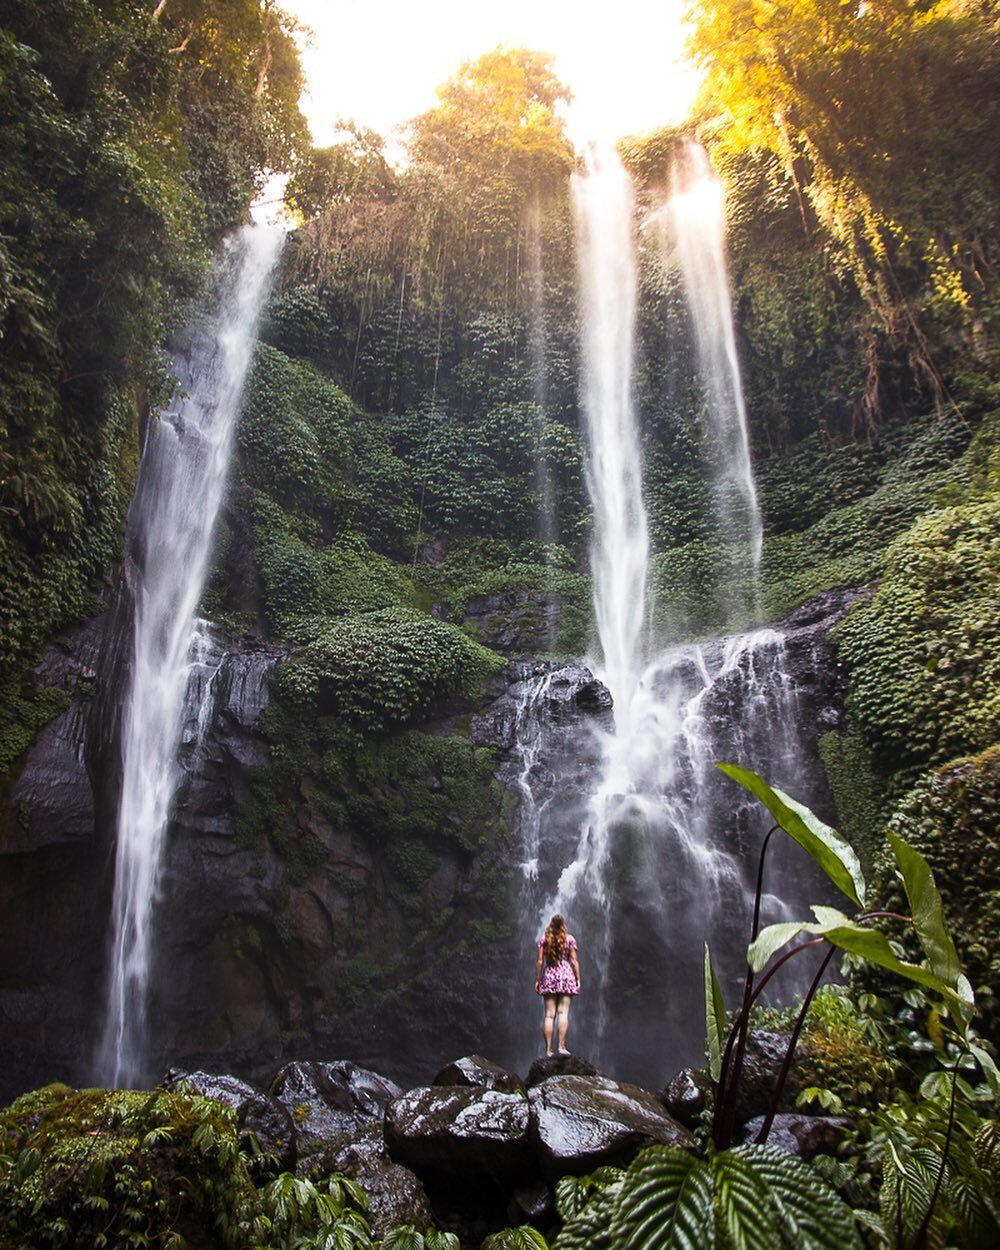 One of our favourite waterfalls ever!!! Highly recommend visiting Sekumpul Waterfalls when you are in Bali. Its a bit of a hike but so worth it! 
.
Where has been your favourite waterfall?